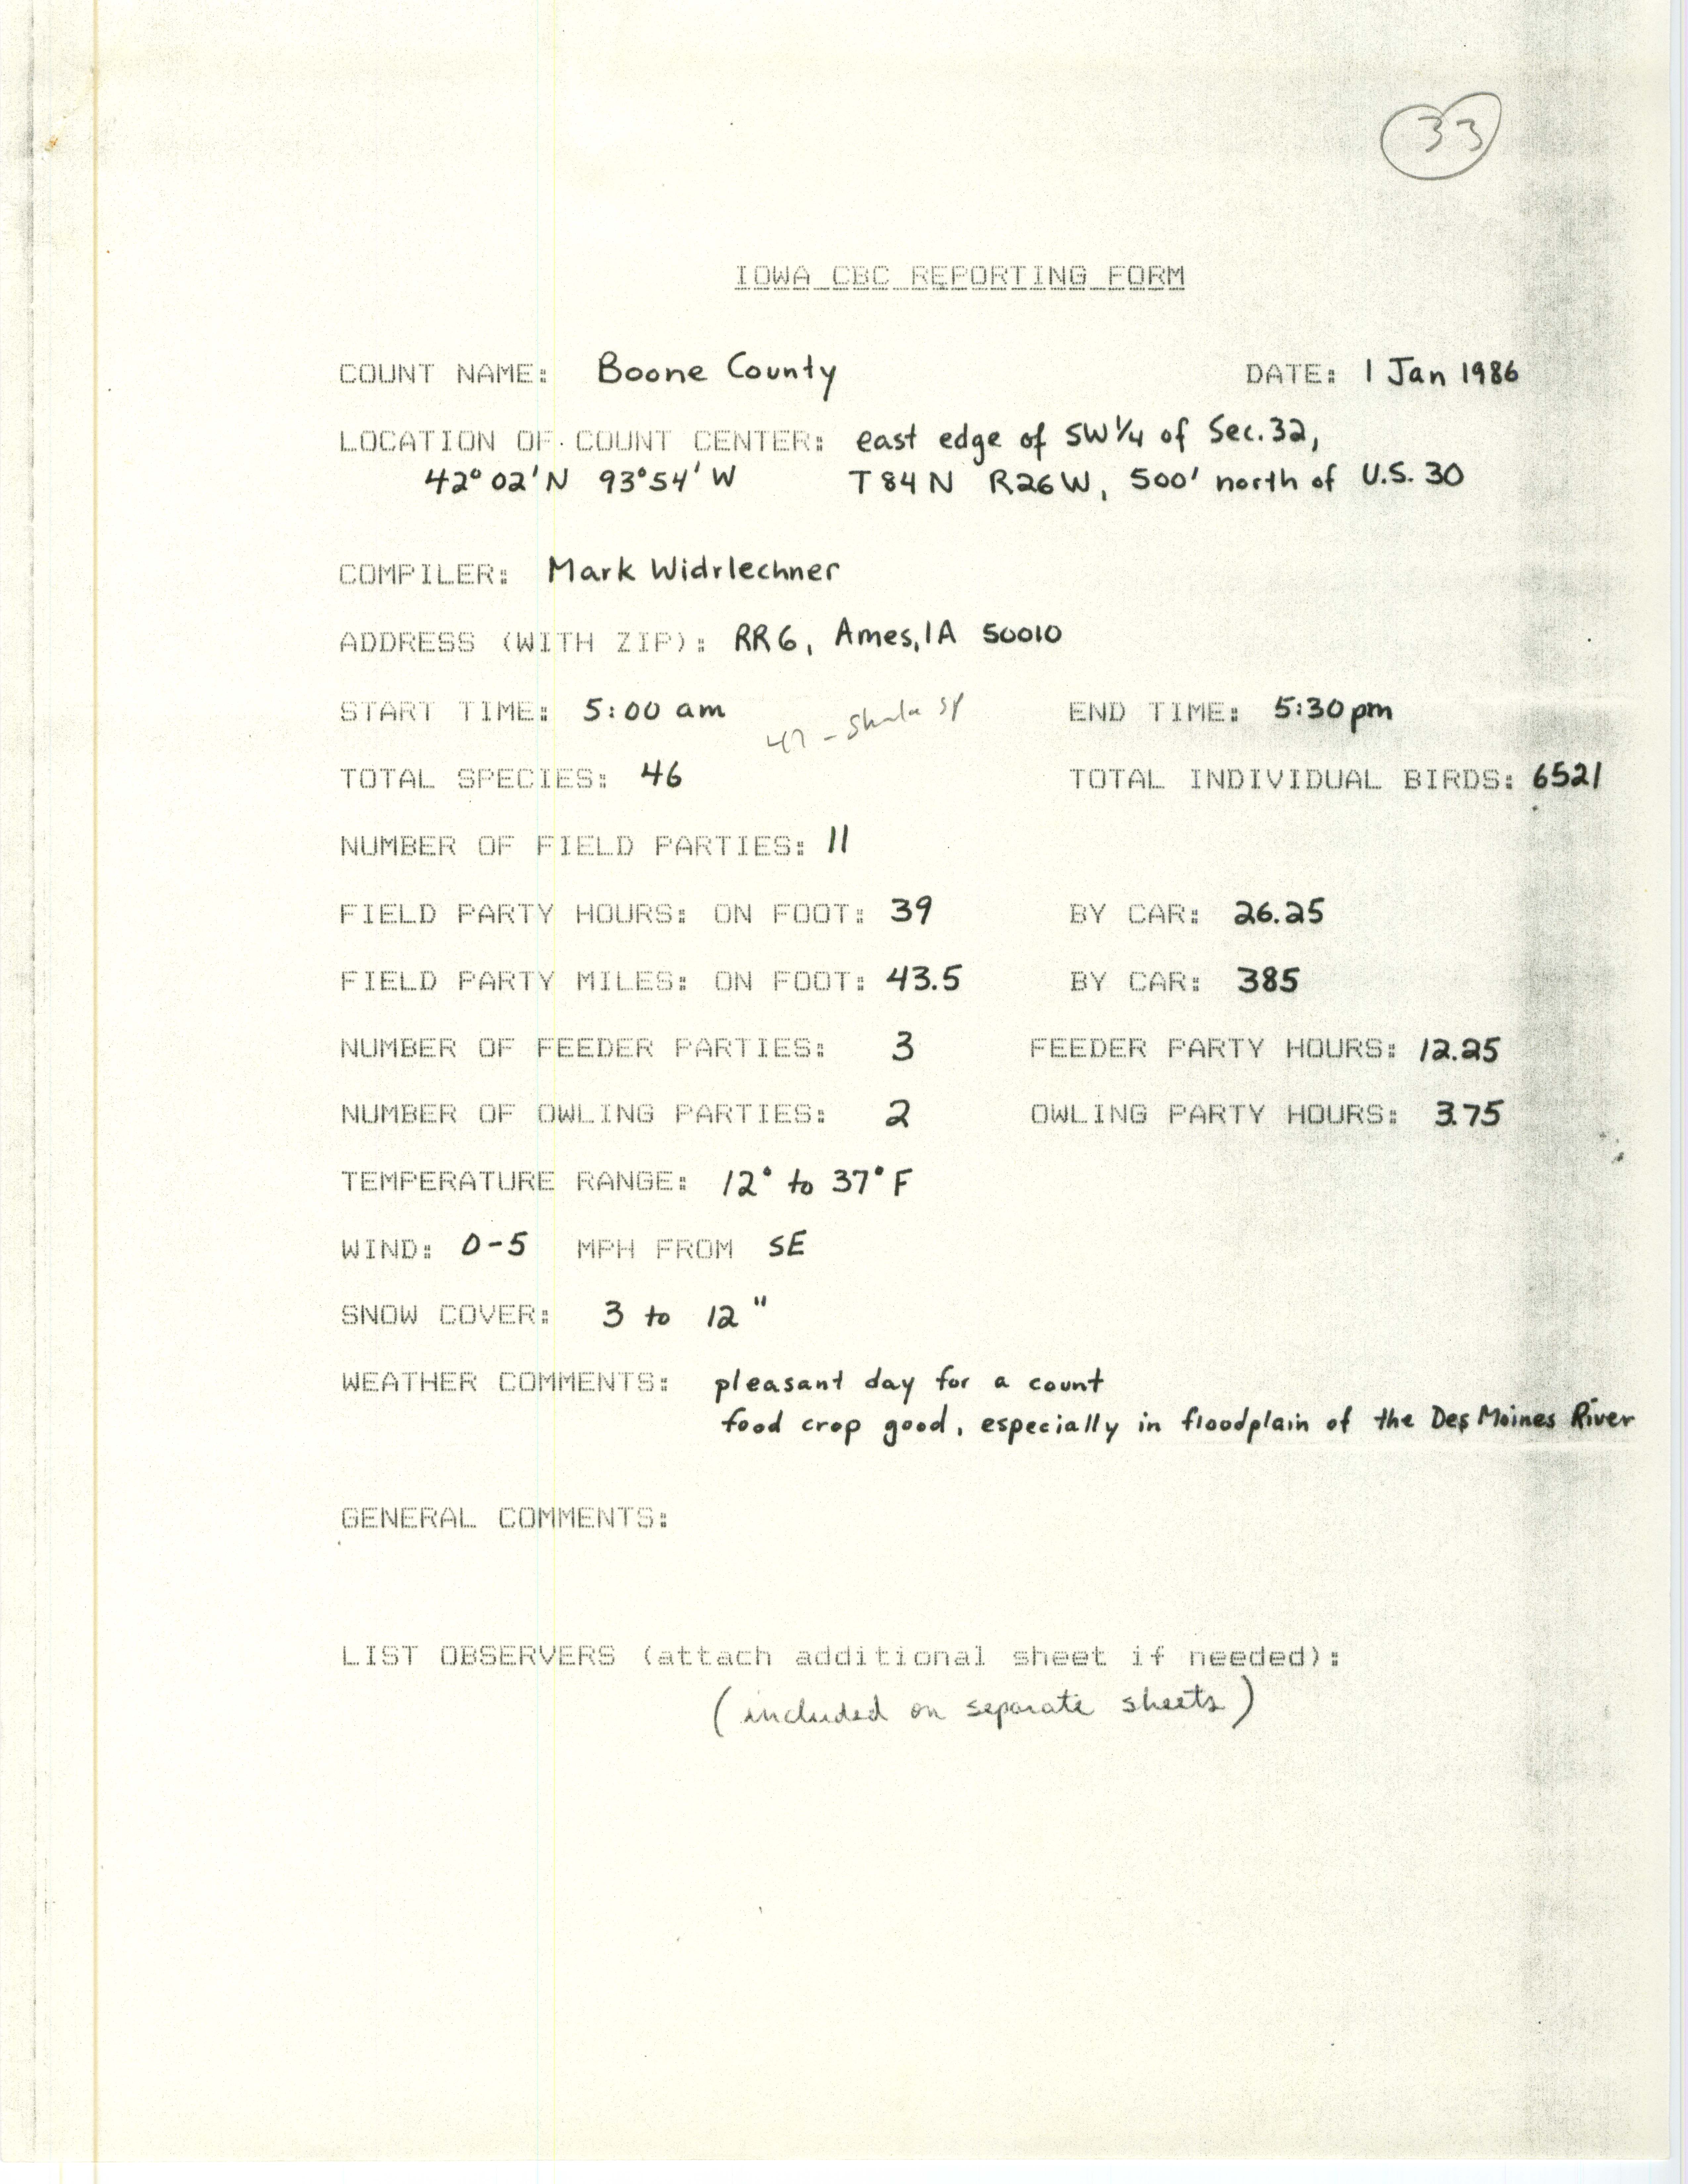 Iowa CBC reporting form, Boone County, January 1, 1986